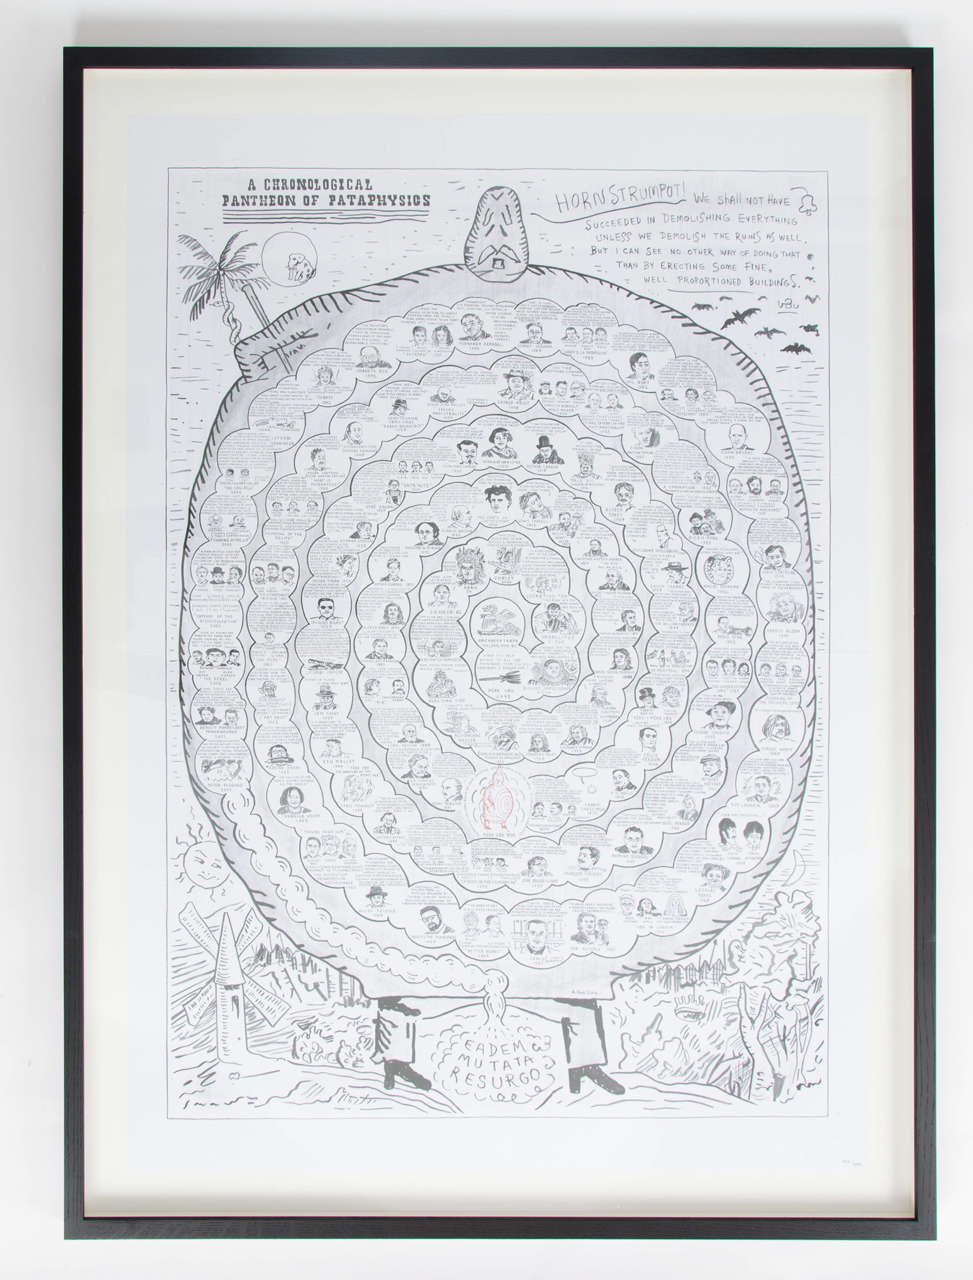 A 'quirky' print of the chronological pantheon of pataphysics commissioned by The Journal of the London Institute of Pataphysics. By the artist Adam Dant Edition 233/499.